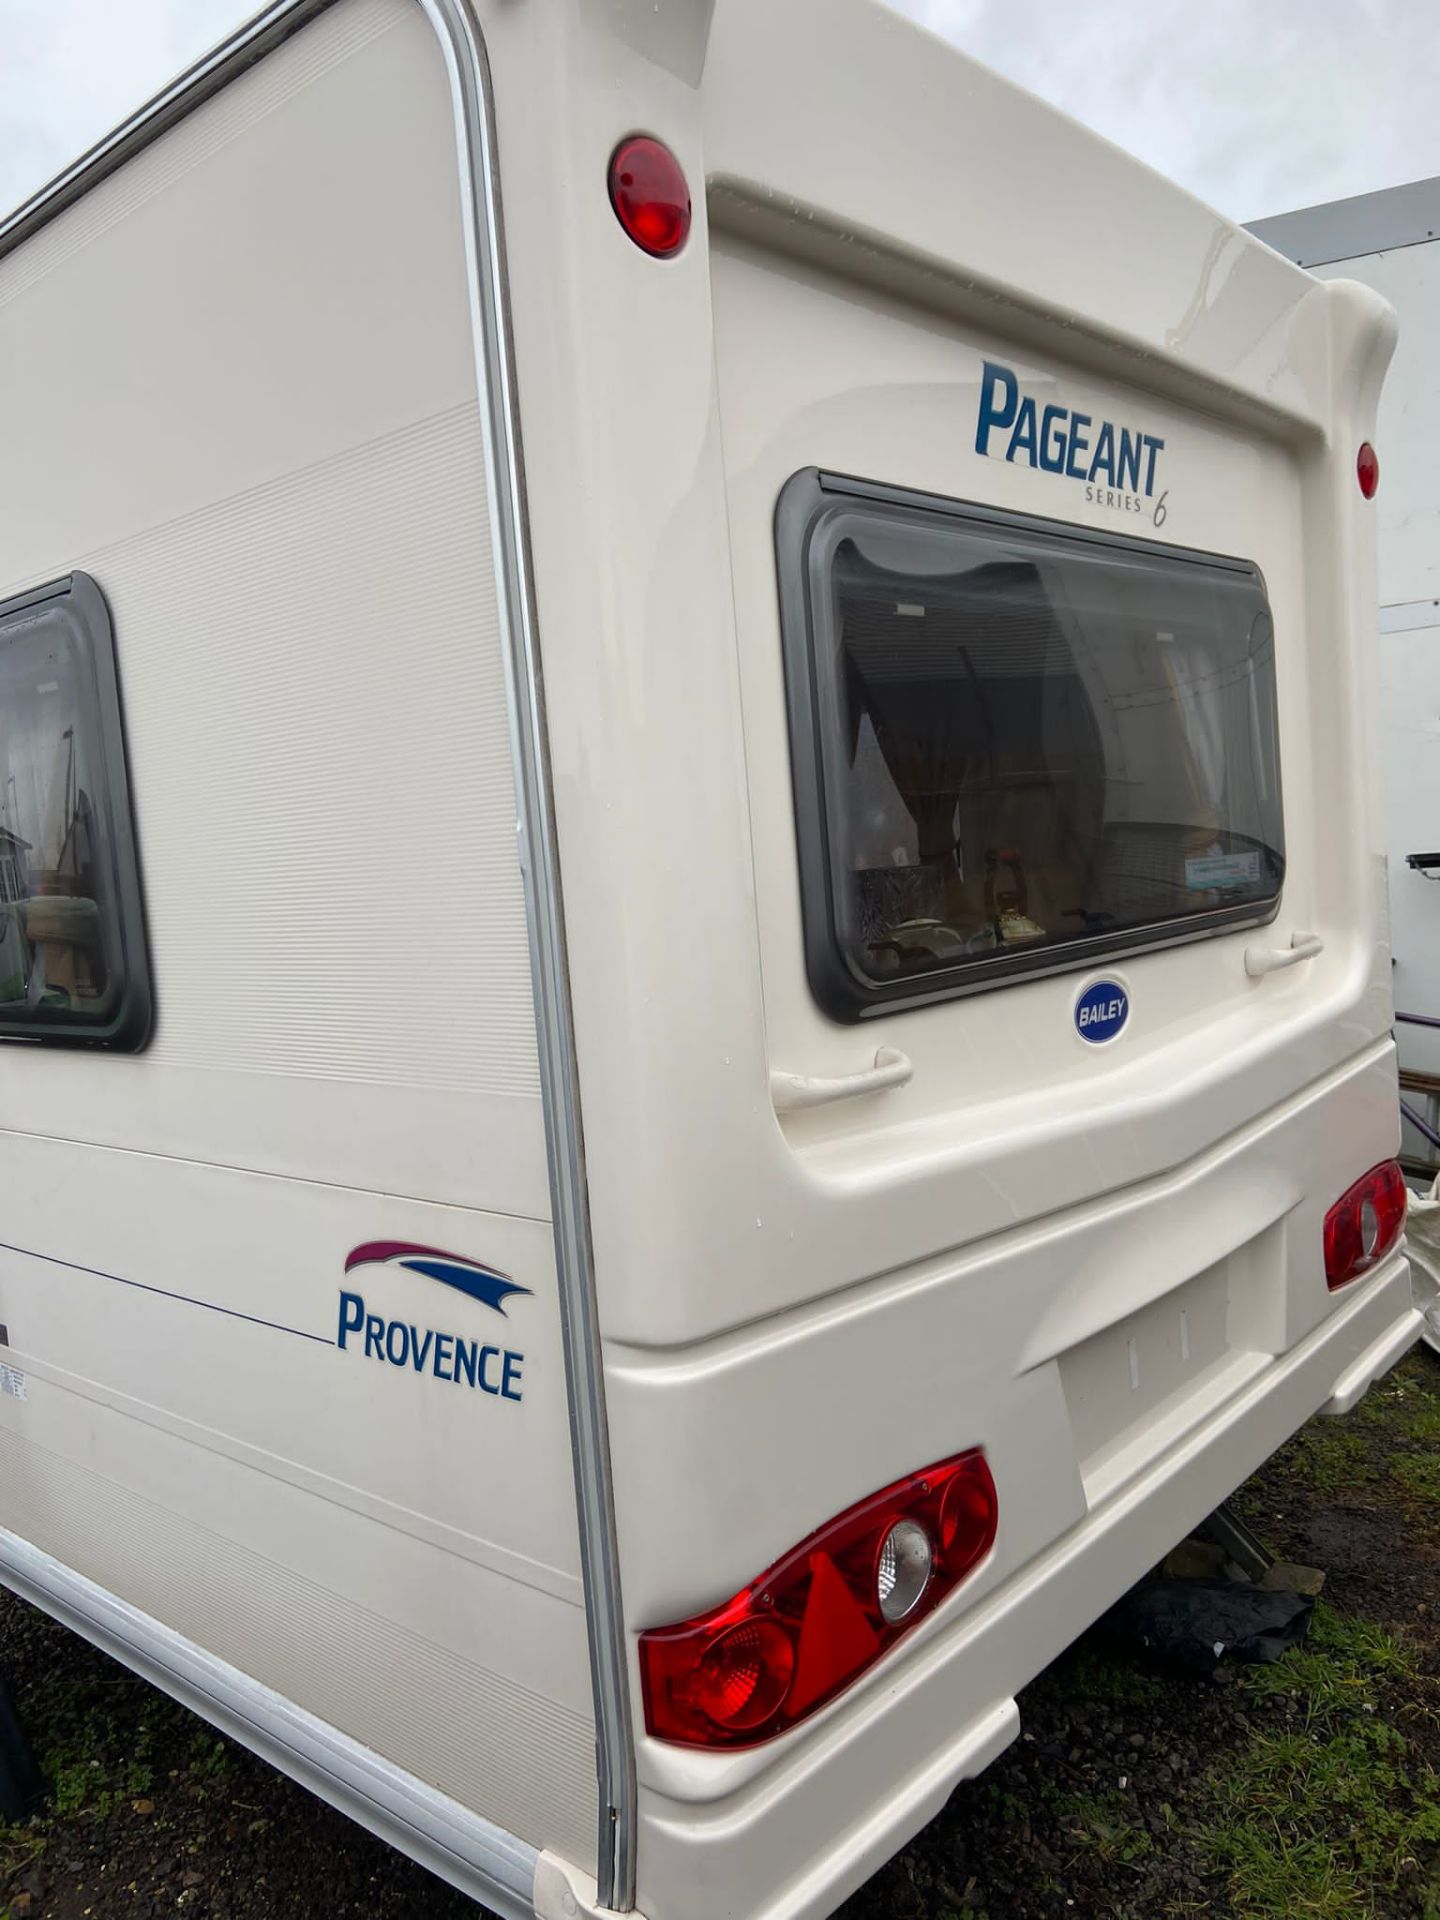 ** ON SALE ** Bailey Pageant series 6 - 4 Berth - '2007 Year' Middle Bathroom - No Vat - Image 3 of 11